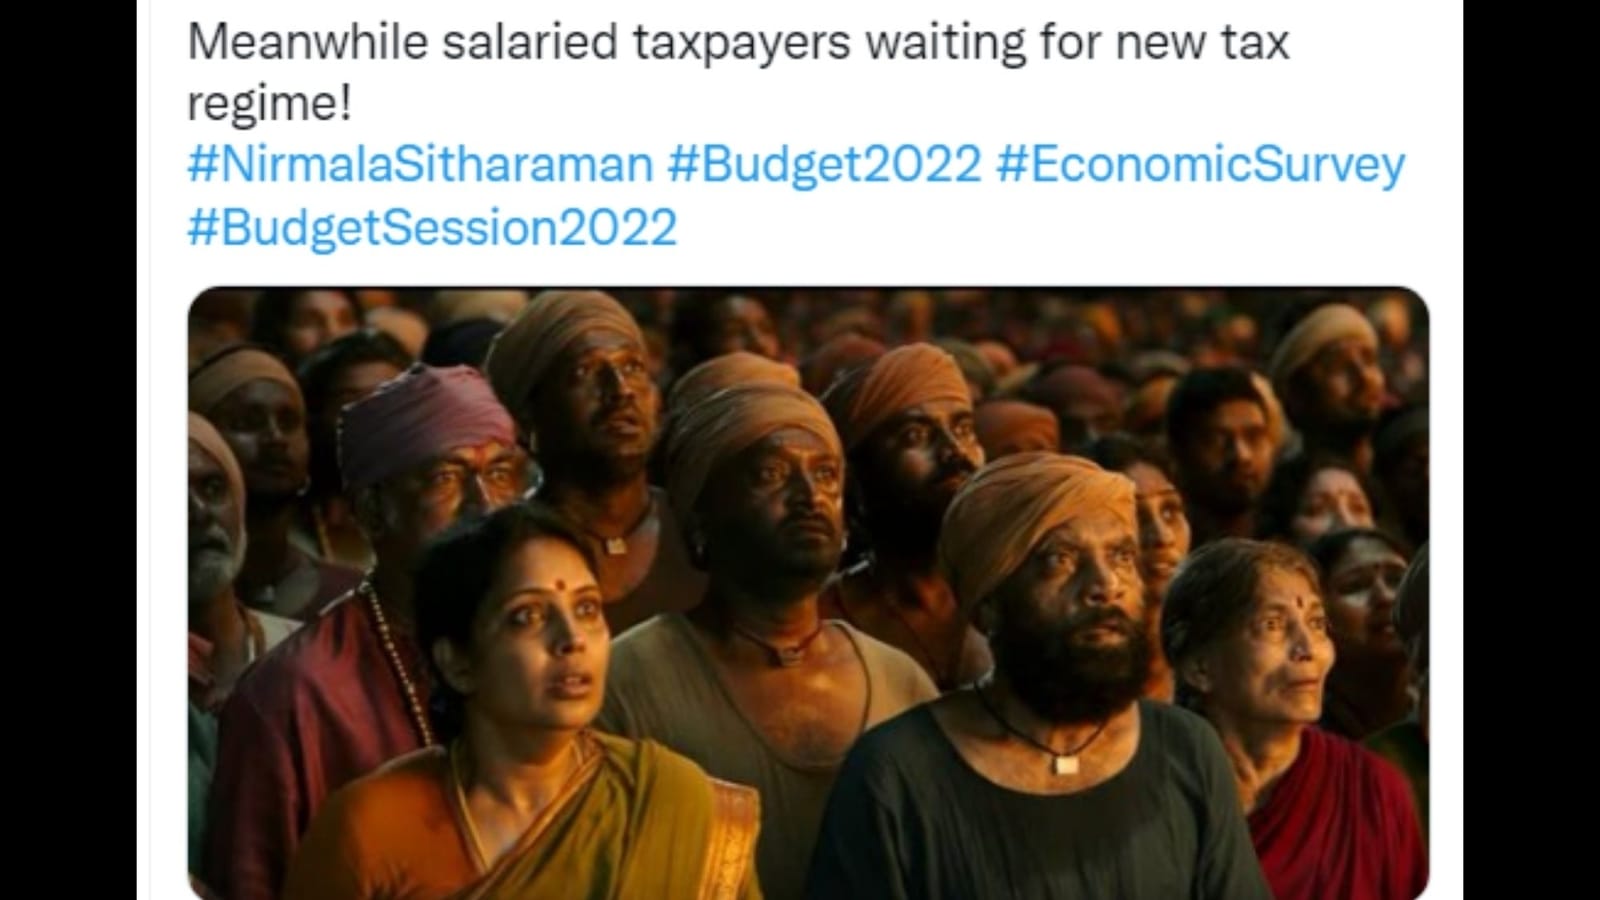 Twitter abuzz with memes and jokes ahead of the Union Budget Trending